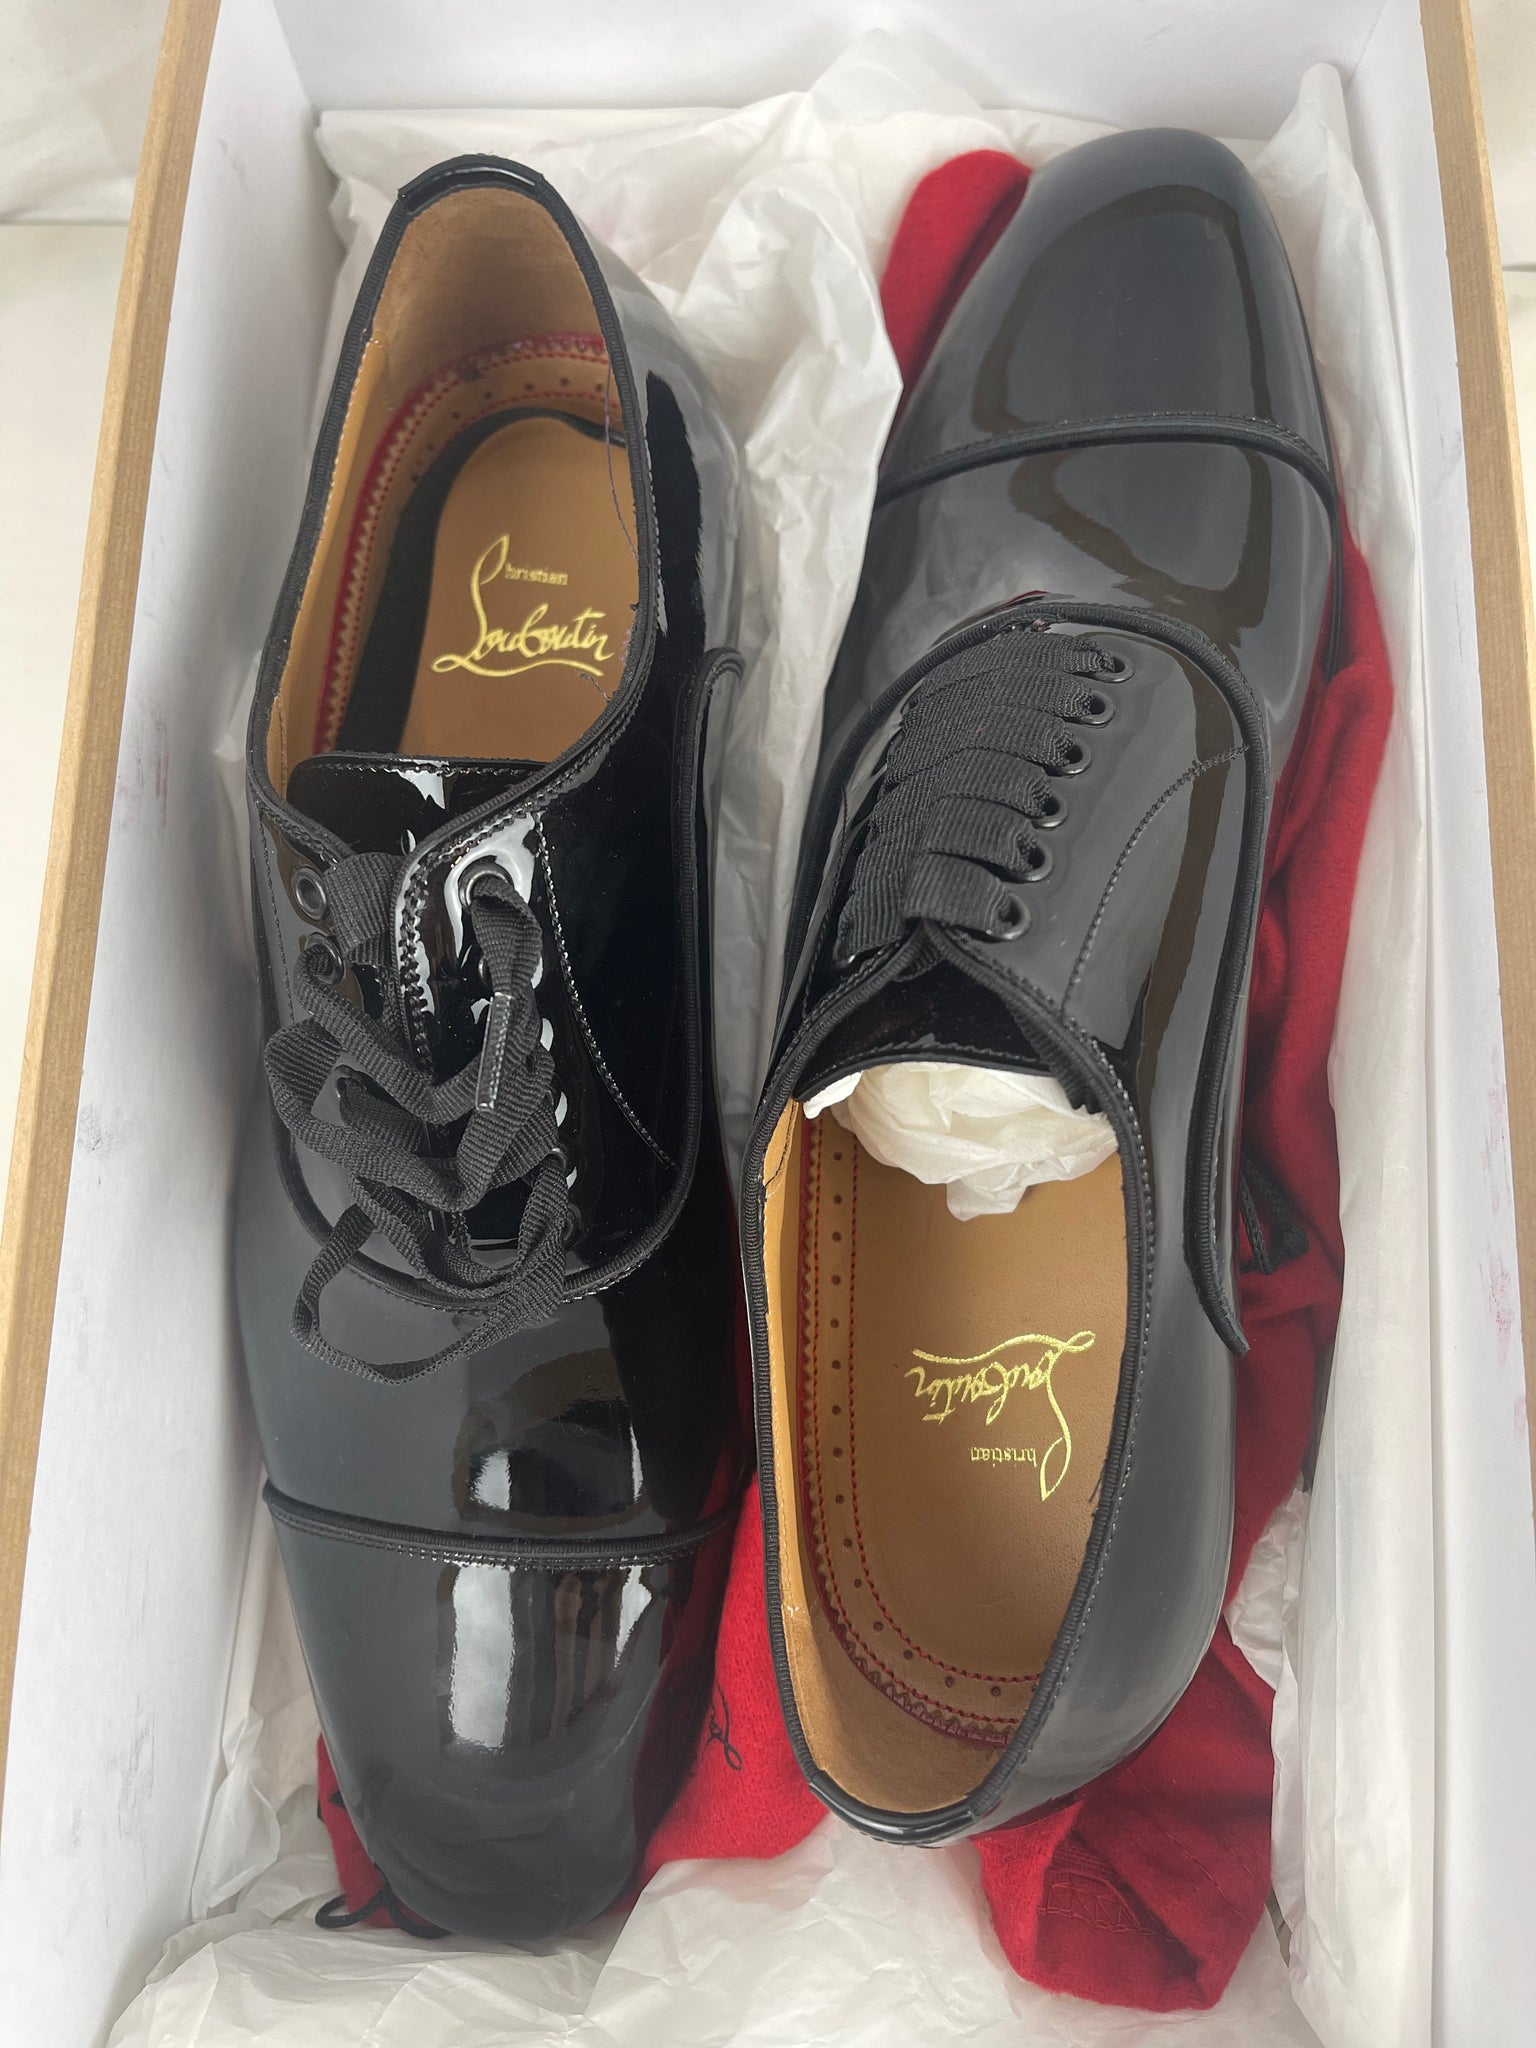 CHRISTIAN LOUBOUTIN: Greggo lace-up shoes in leather - Black  Christian  Louboutin brogue shoes 1150376 online at